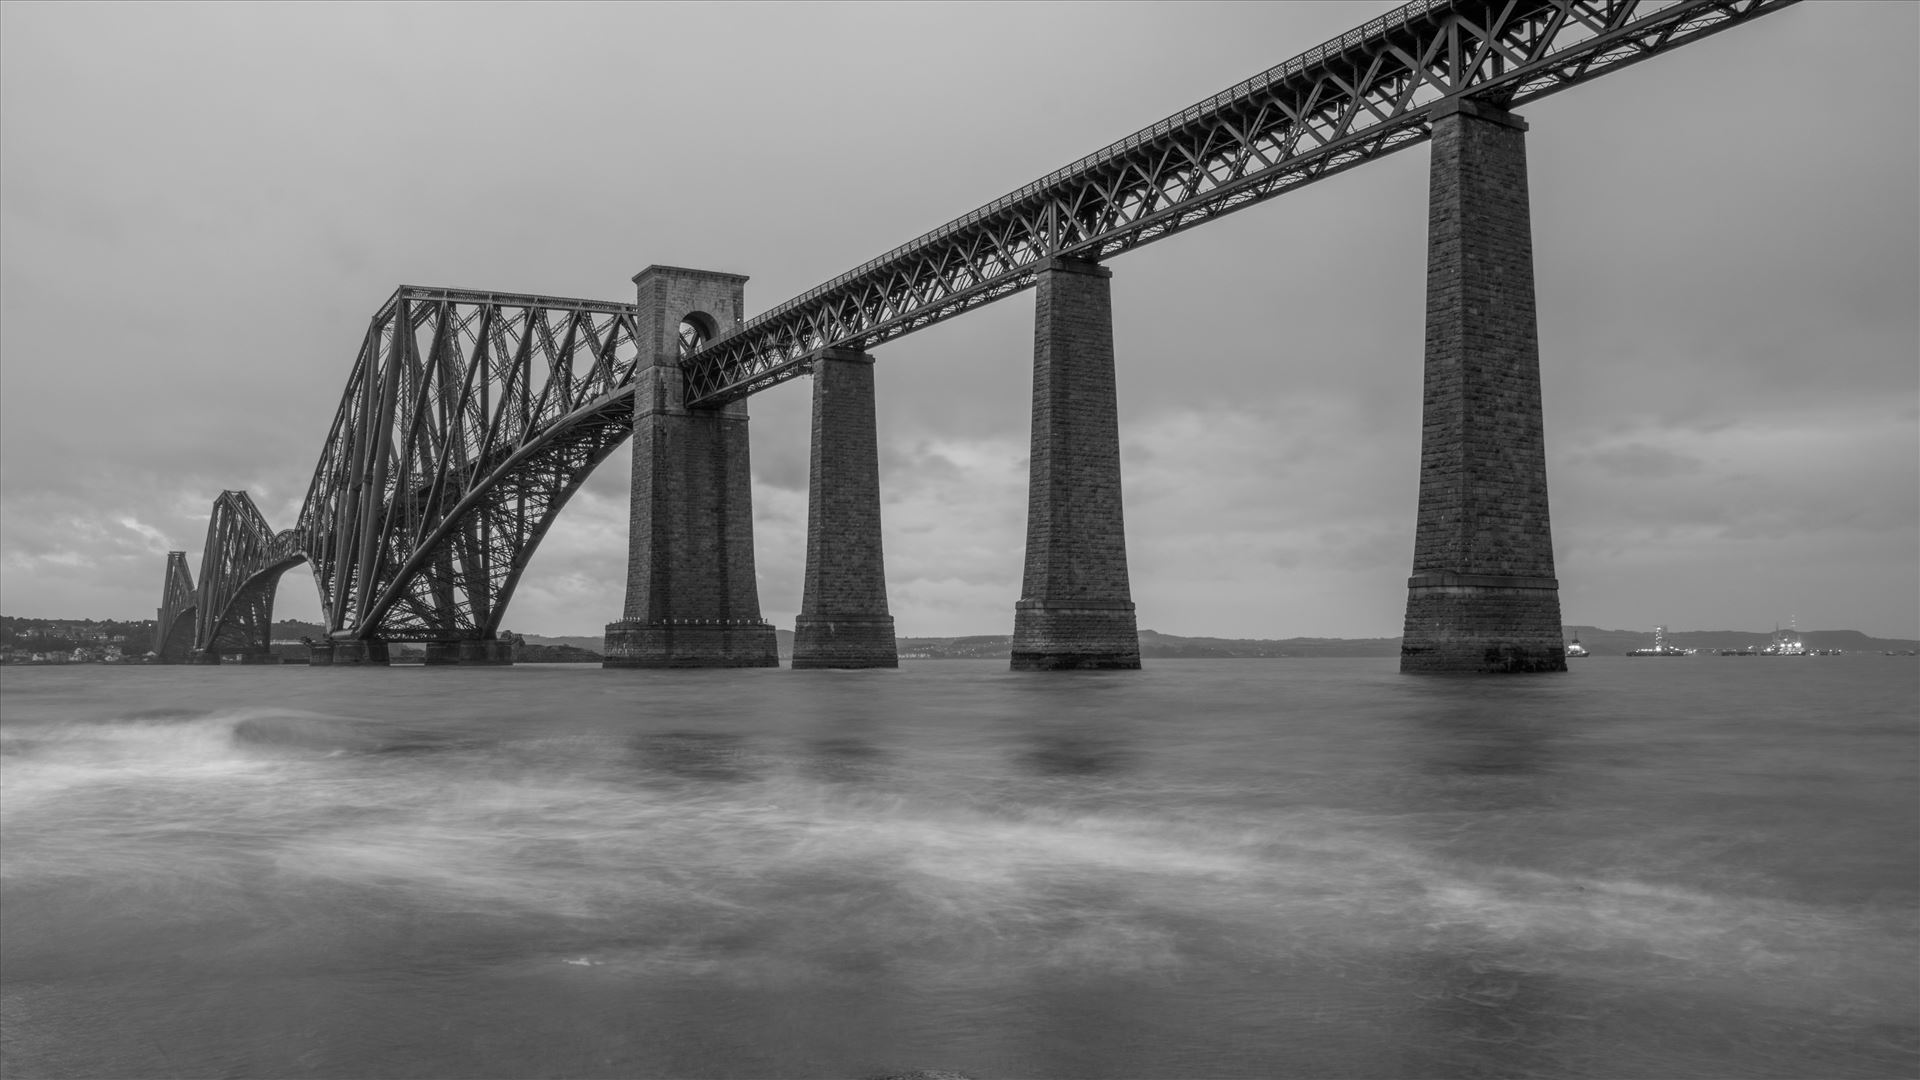 Forth rail bridge - When it opened it had the longest single cantilever bridge span in the world, until 1919 when the Quebec Bridge in Canada was completed. It continues to be the world's second-longest single cantilever span, with a span of 1,709 feet (521 m). by philreay